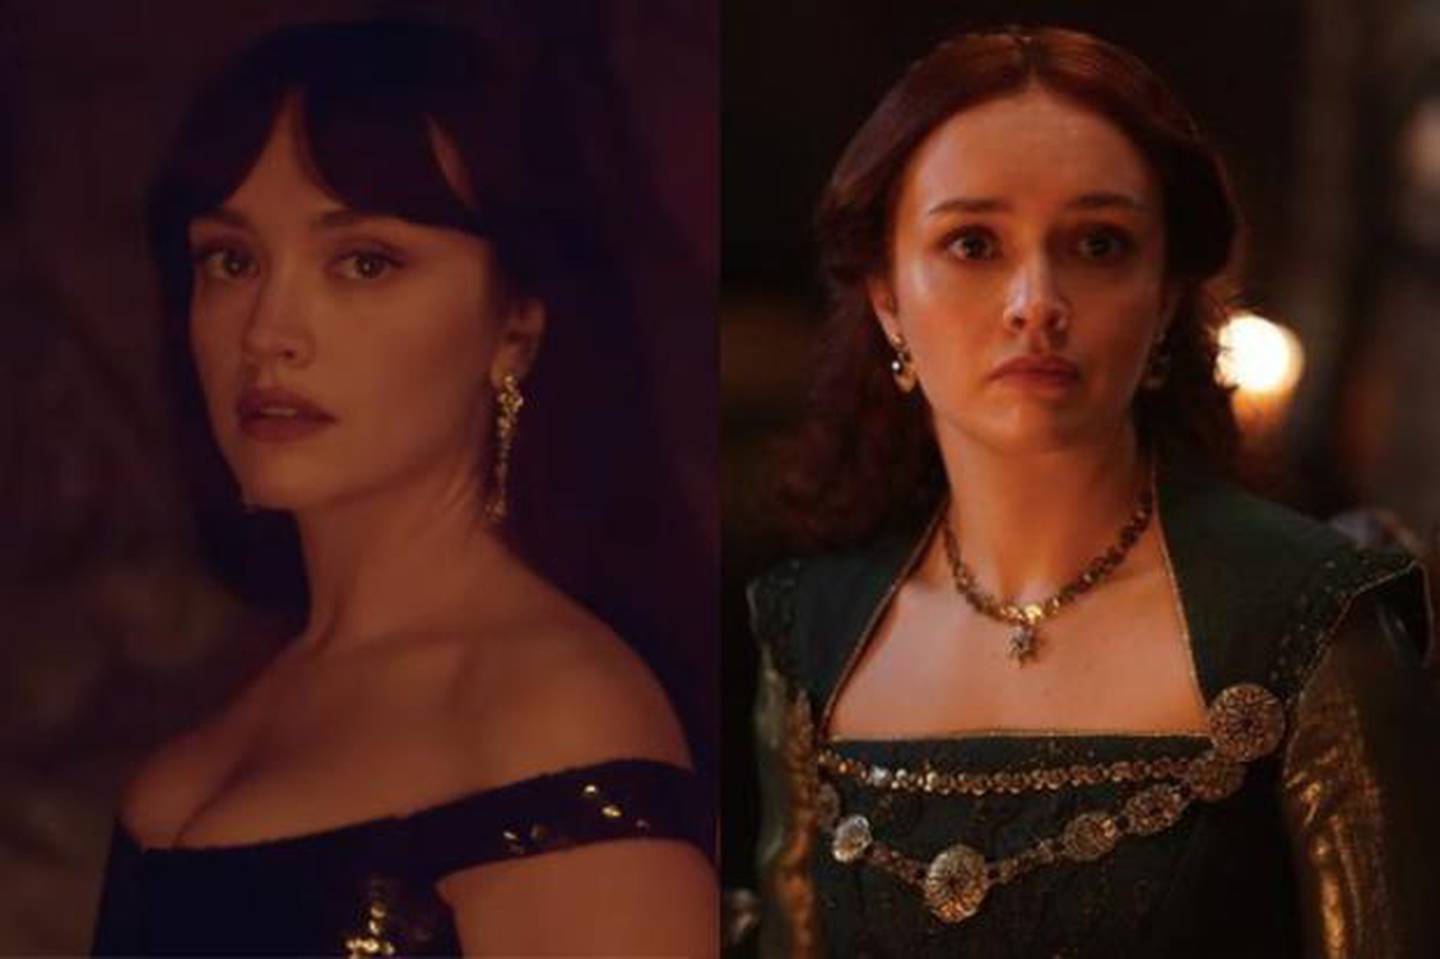 Alicent Hightower is the adult version characterized by Olivia Cooke